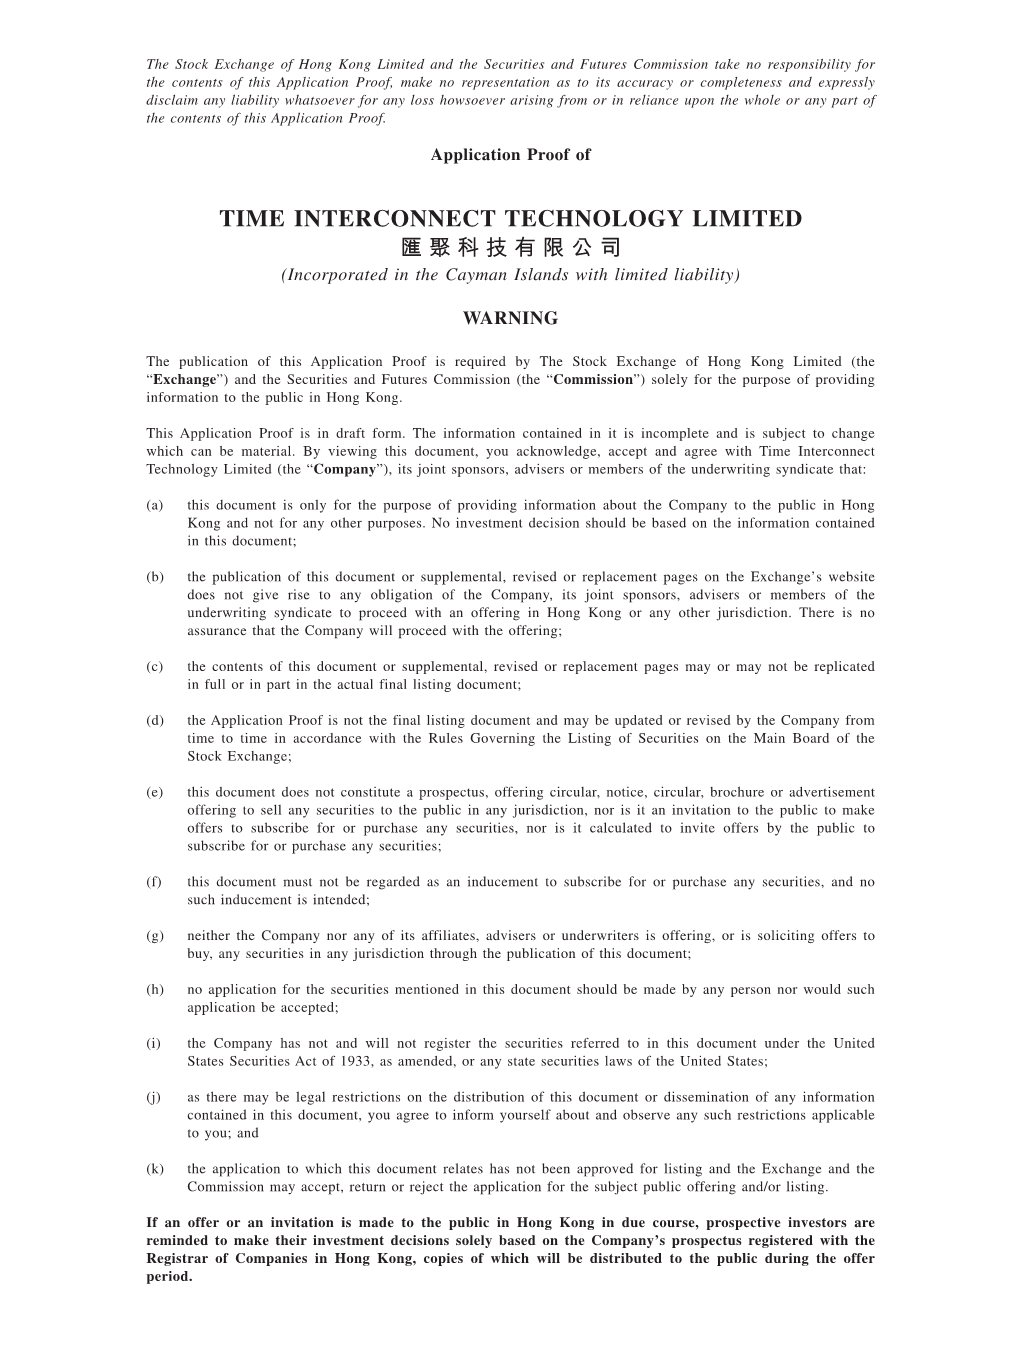 TIME INTERCONNECT TECHNOLOGY LIMITED 匯聚科技有限公司 (Incorporated in the Cayman Islands with Limited Liability)